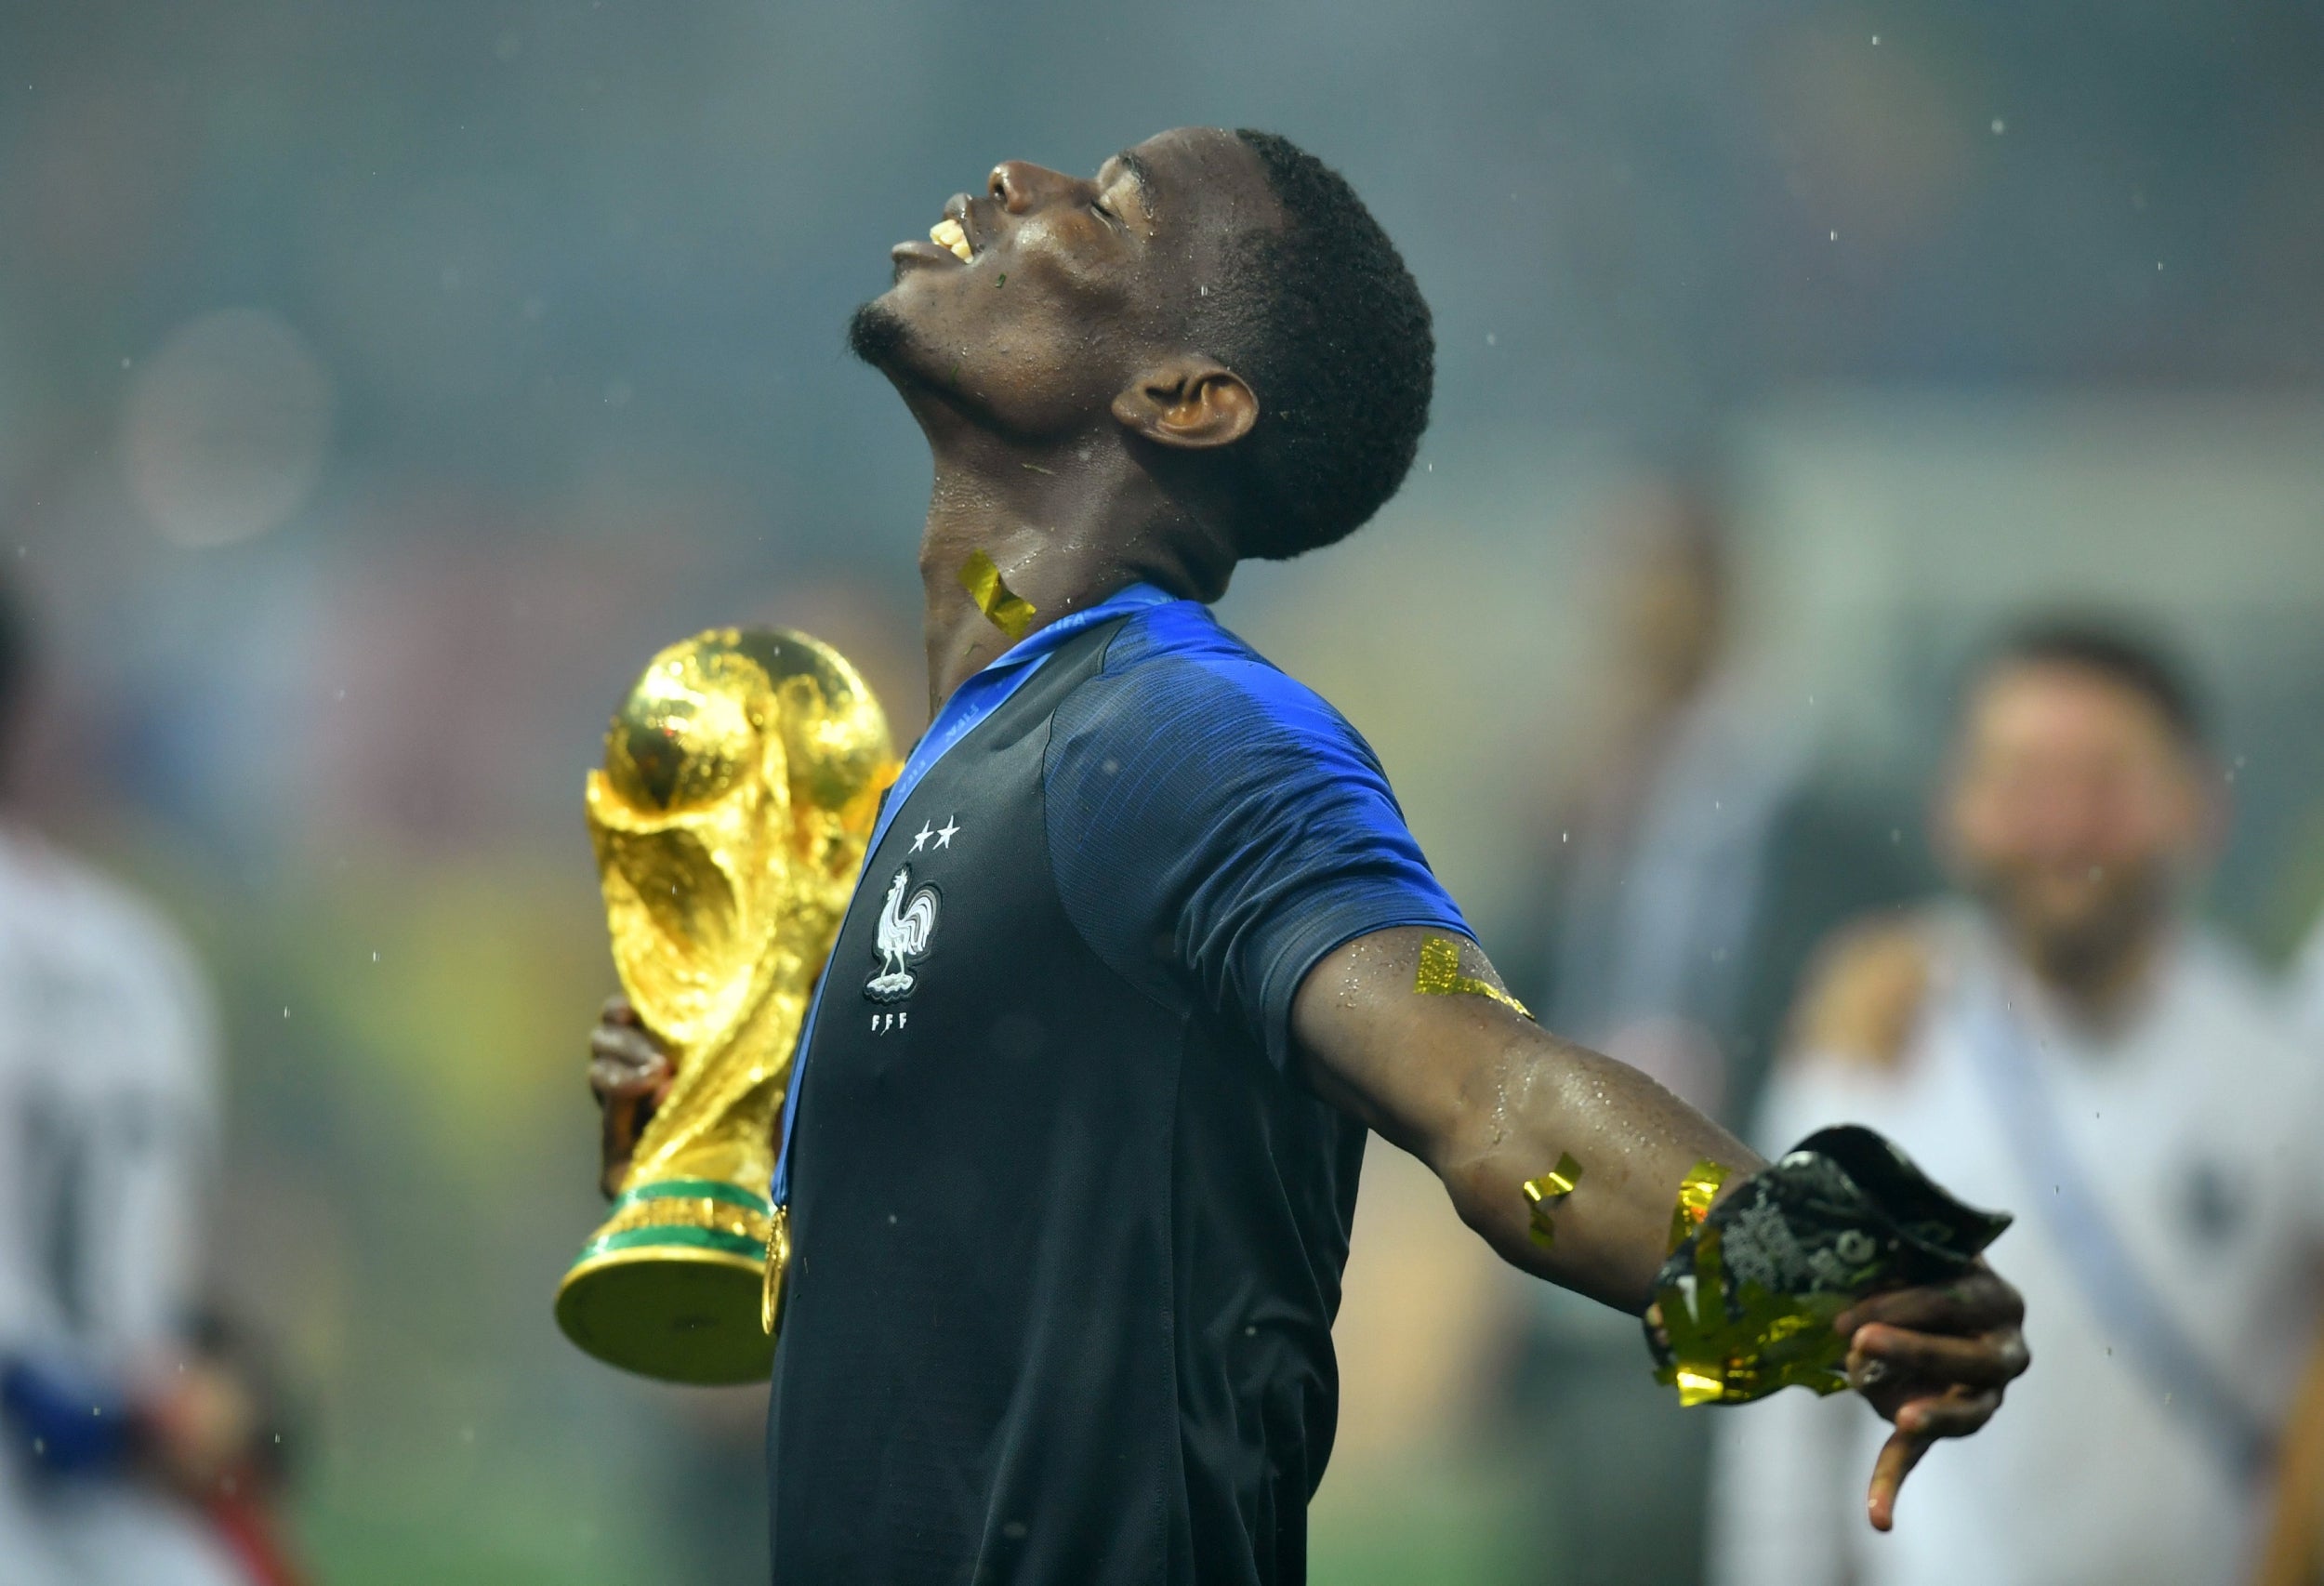 Paul Pogba had a superb World Cup with France